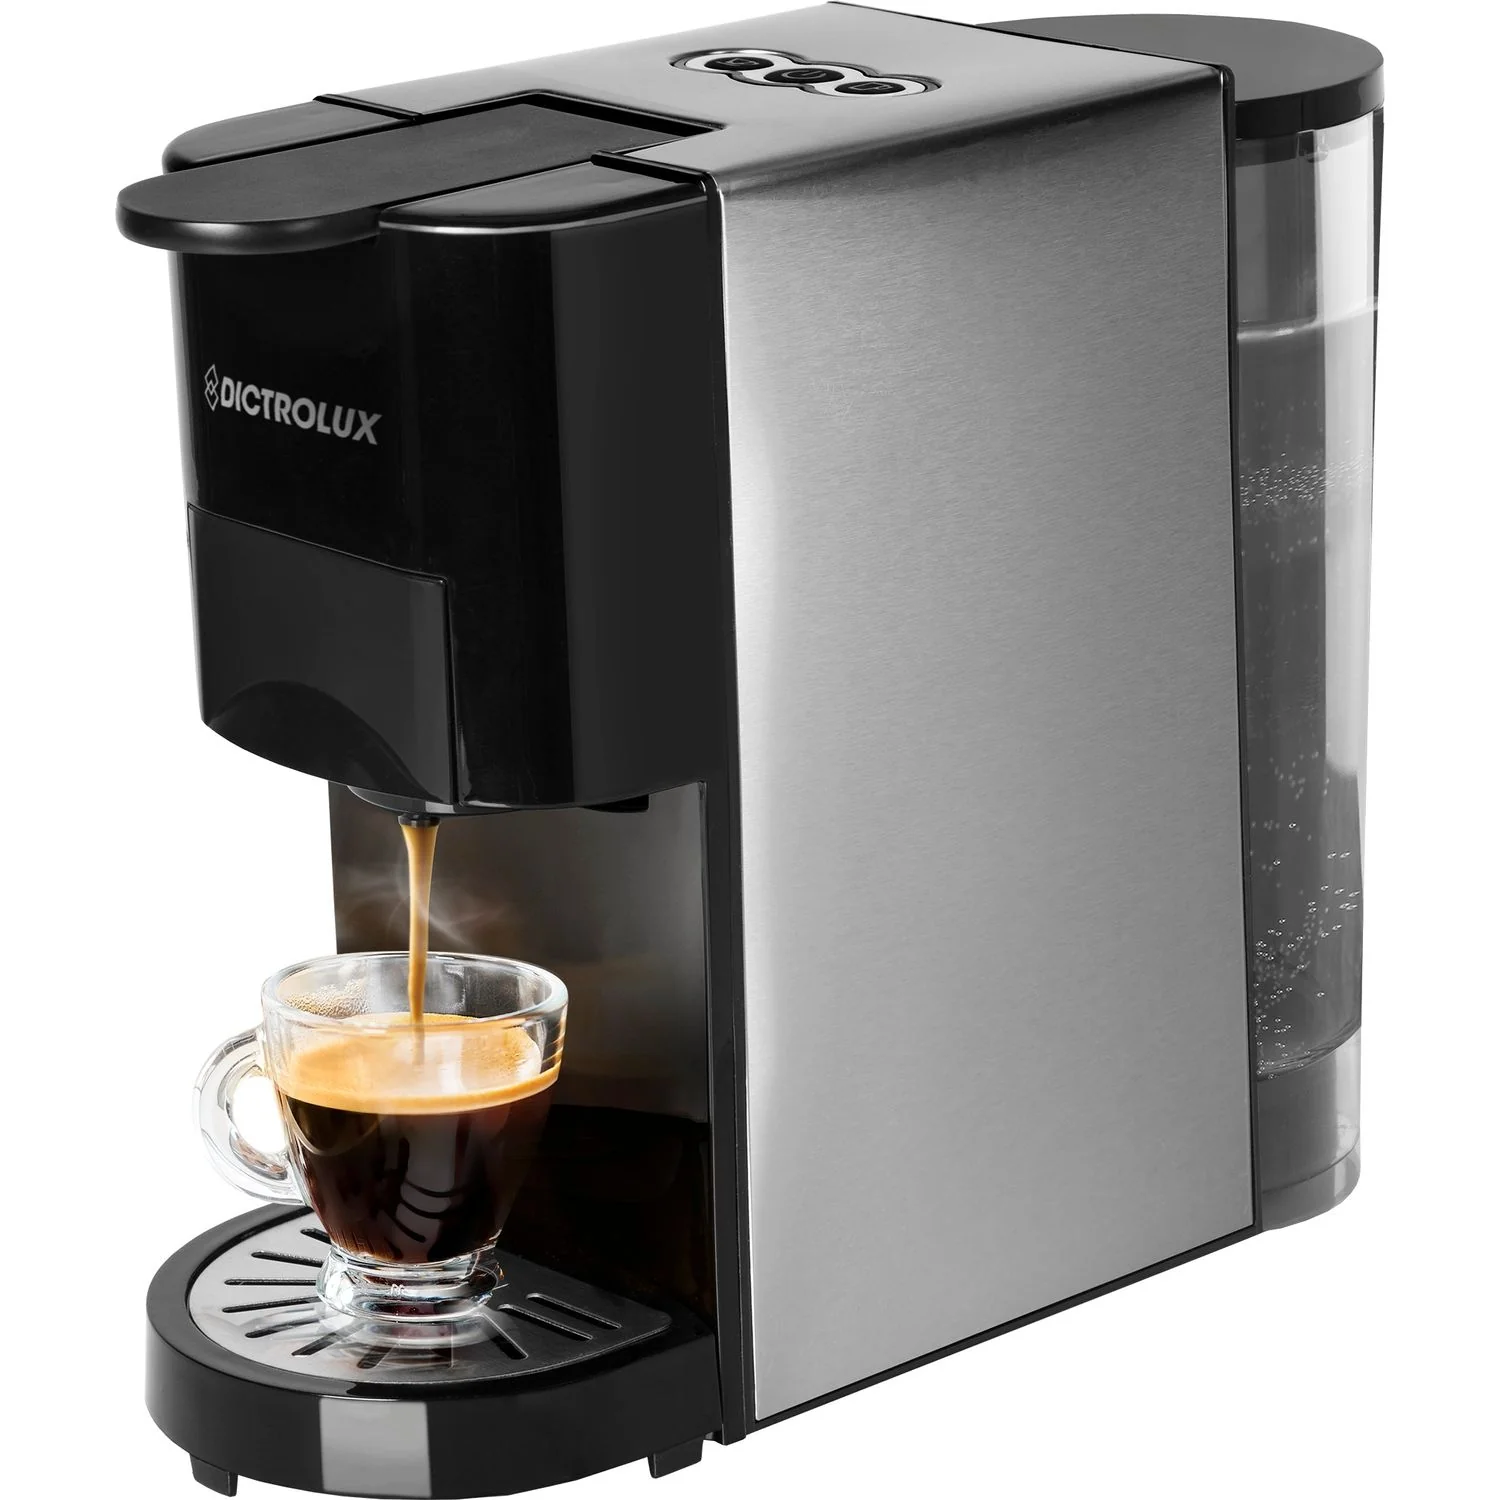 MACCHINA CAFFE' 4in1SPLENDIDA EXPRESS DICTROLUX > Wow Che Shop